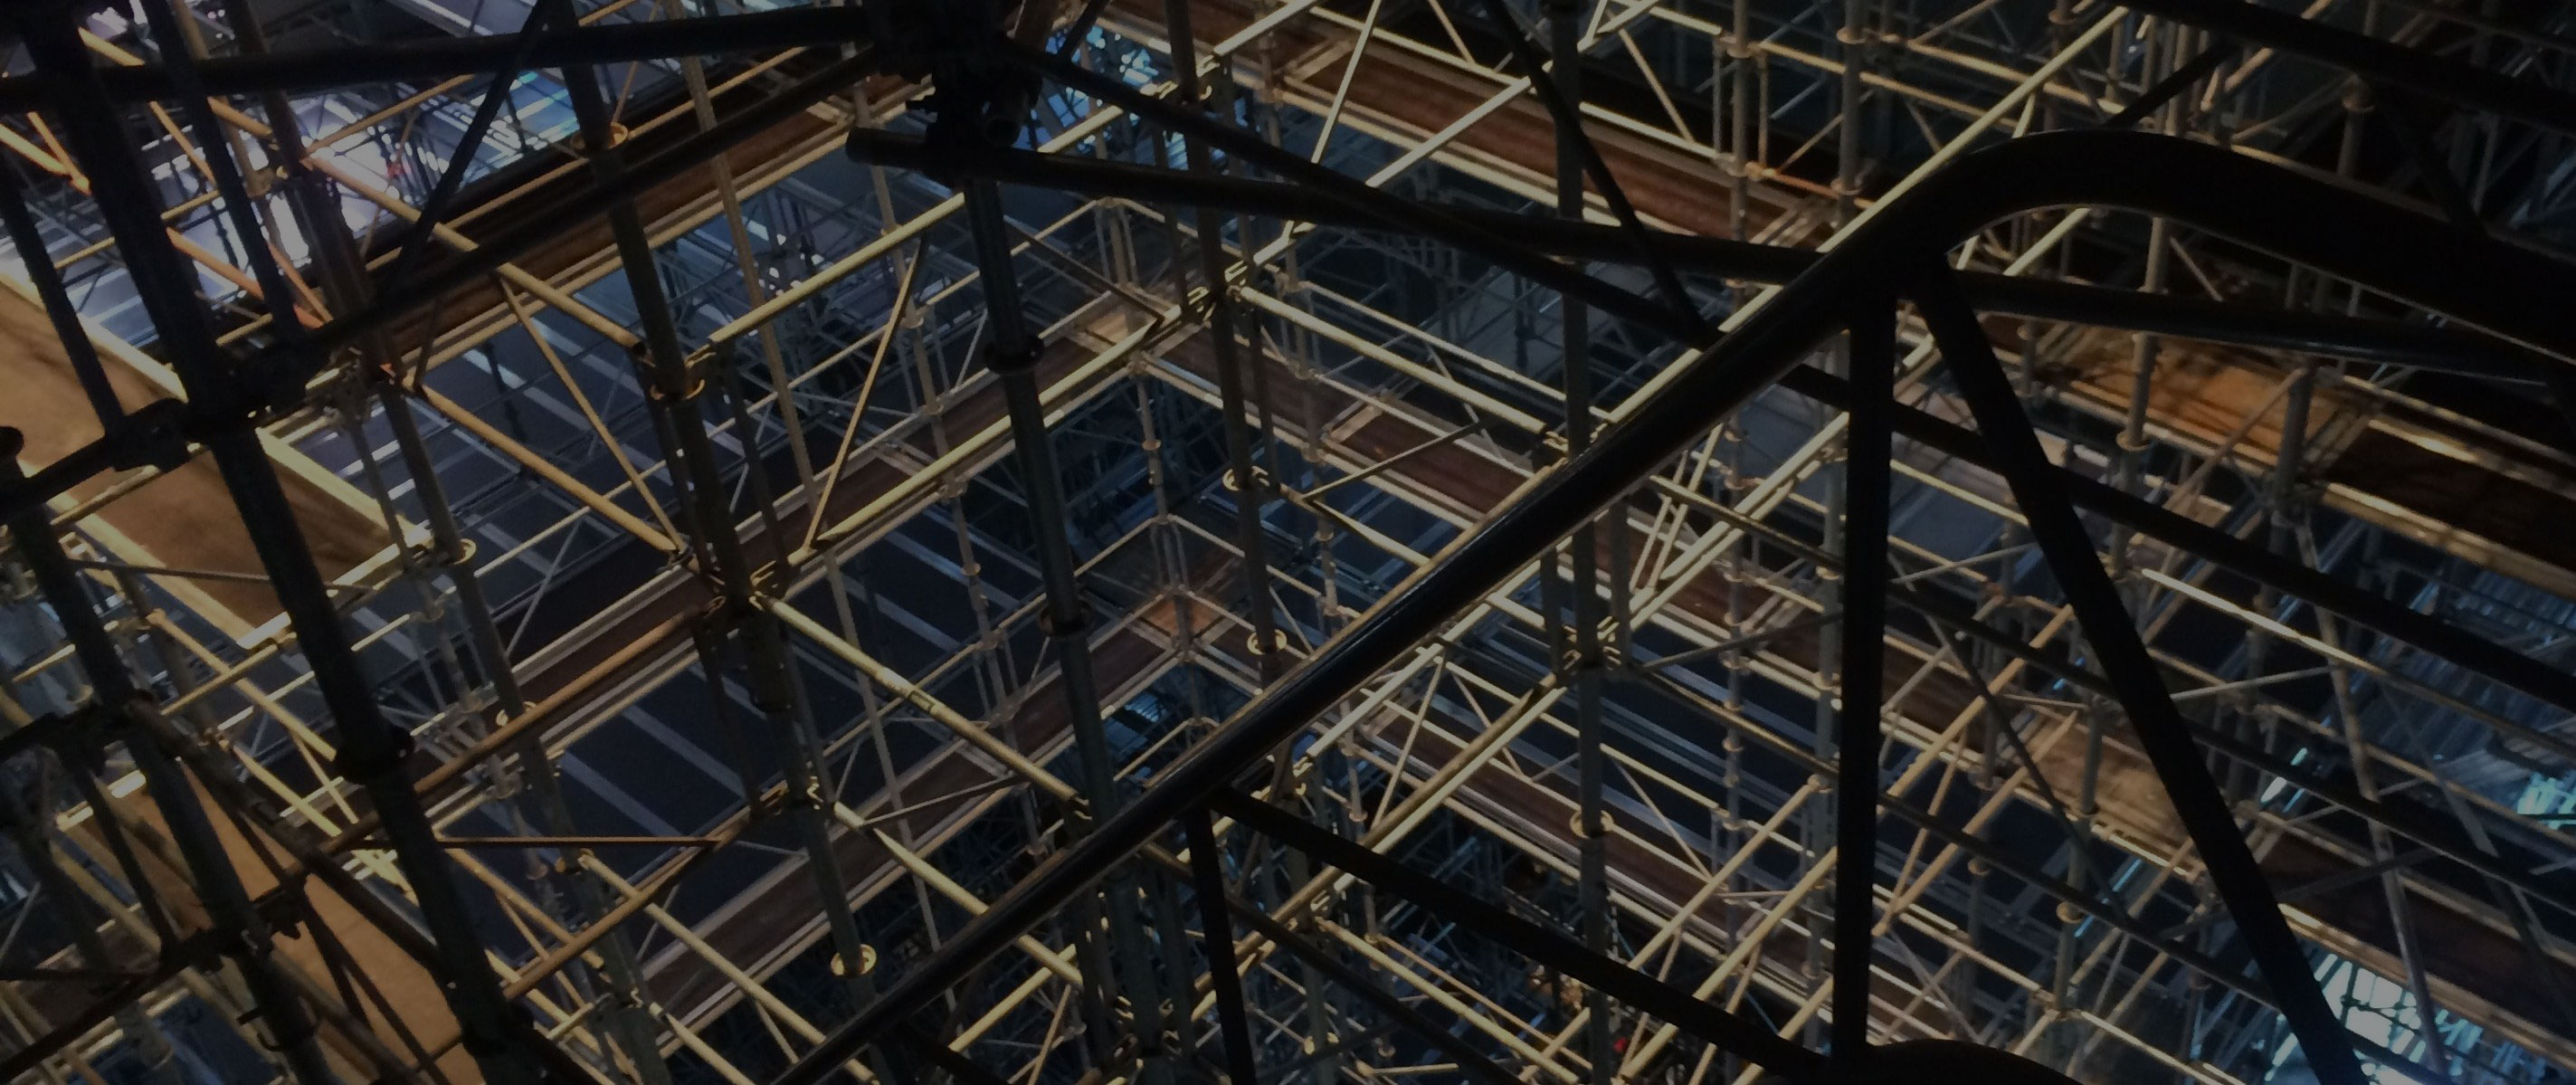 Complex scaffoling network inside a building